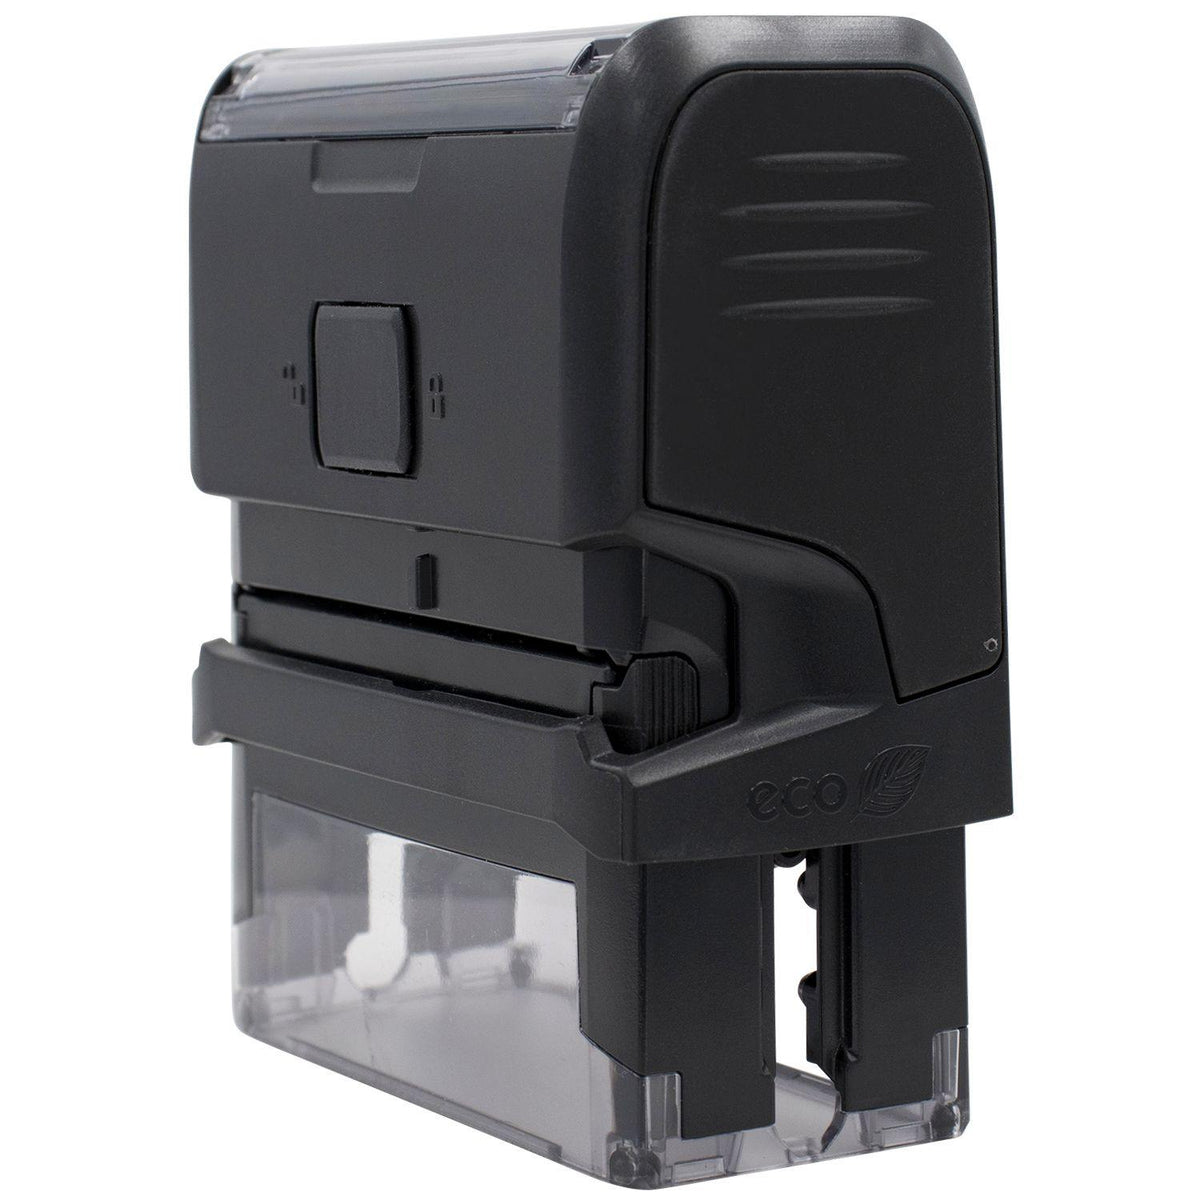 Self-Inking E-mailed with Date Box Stamp - Engineer Seal Stamps - Brand_Trodat, Impression Size_Small, Stamp Type_Self-Inking Stamp, Type of Use_General, Type of Use_Office